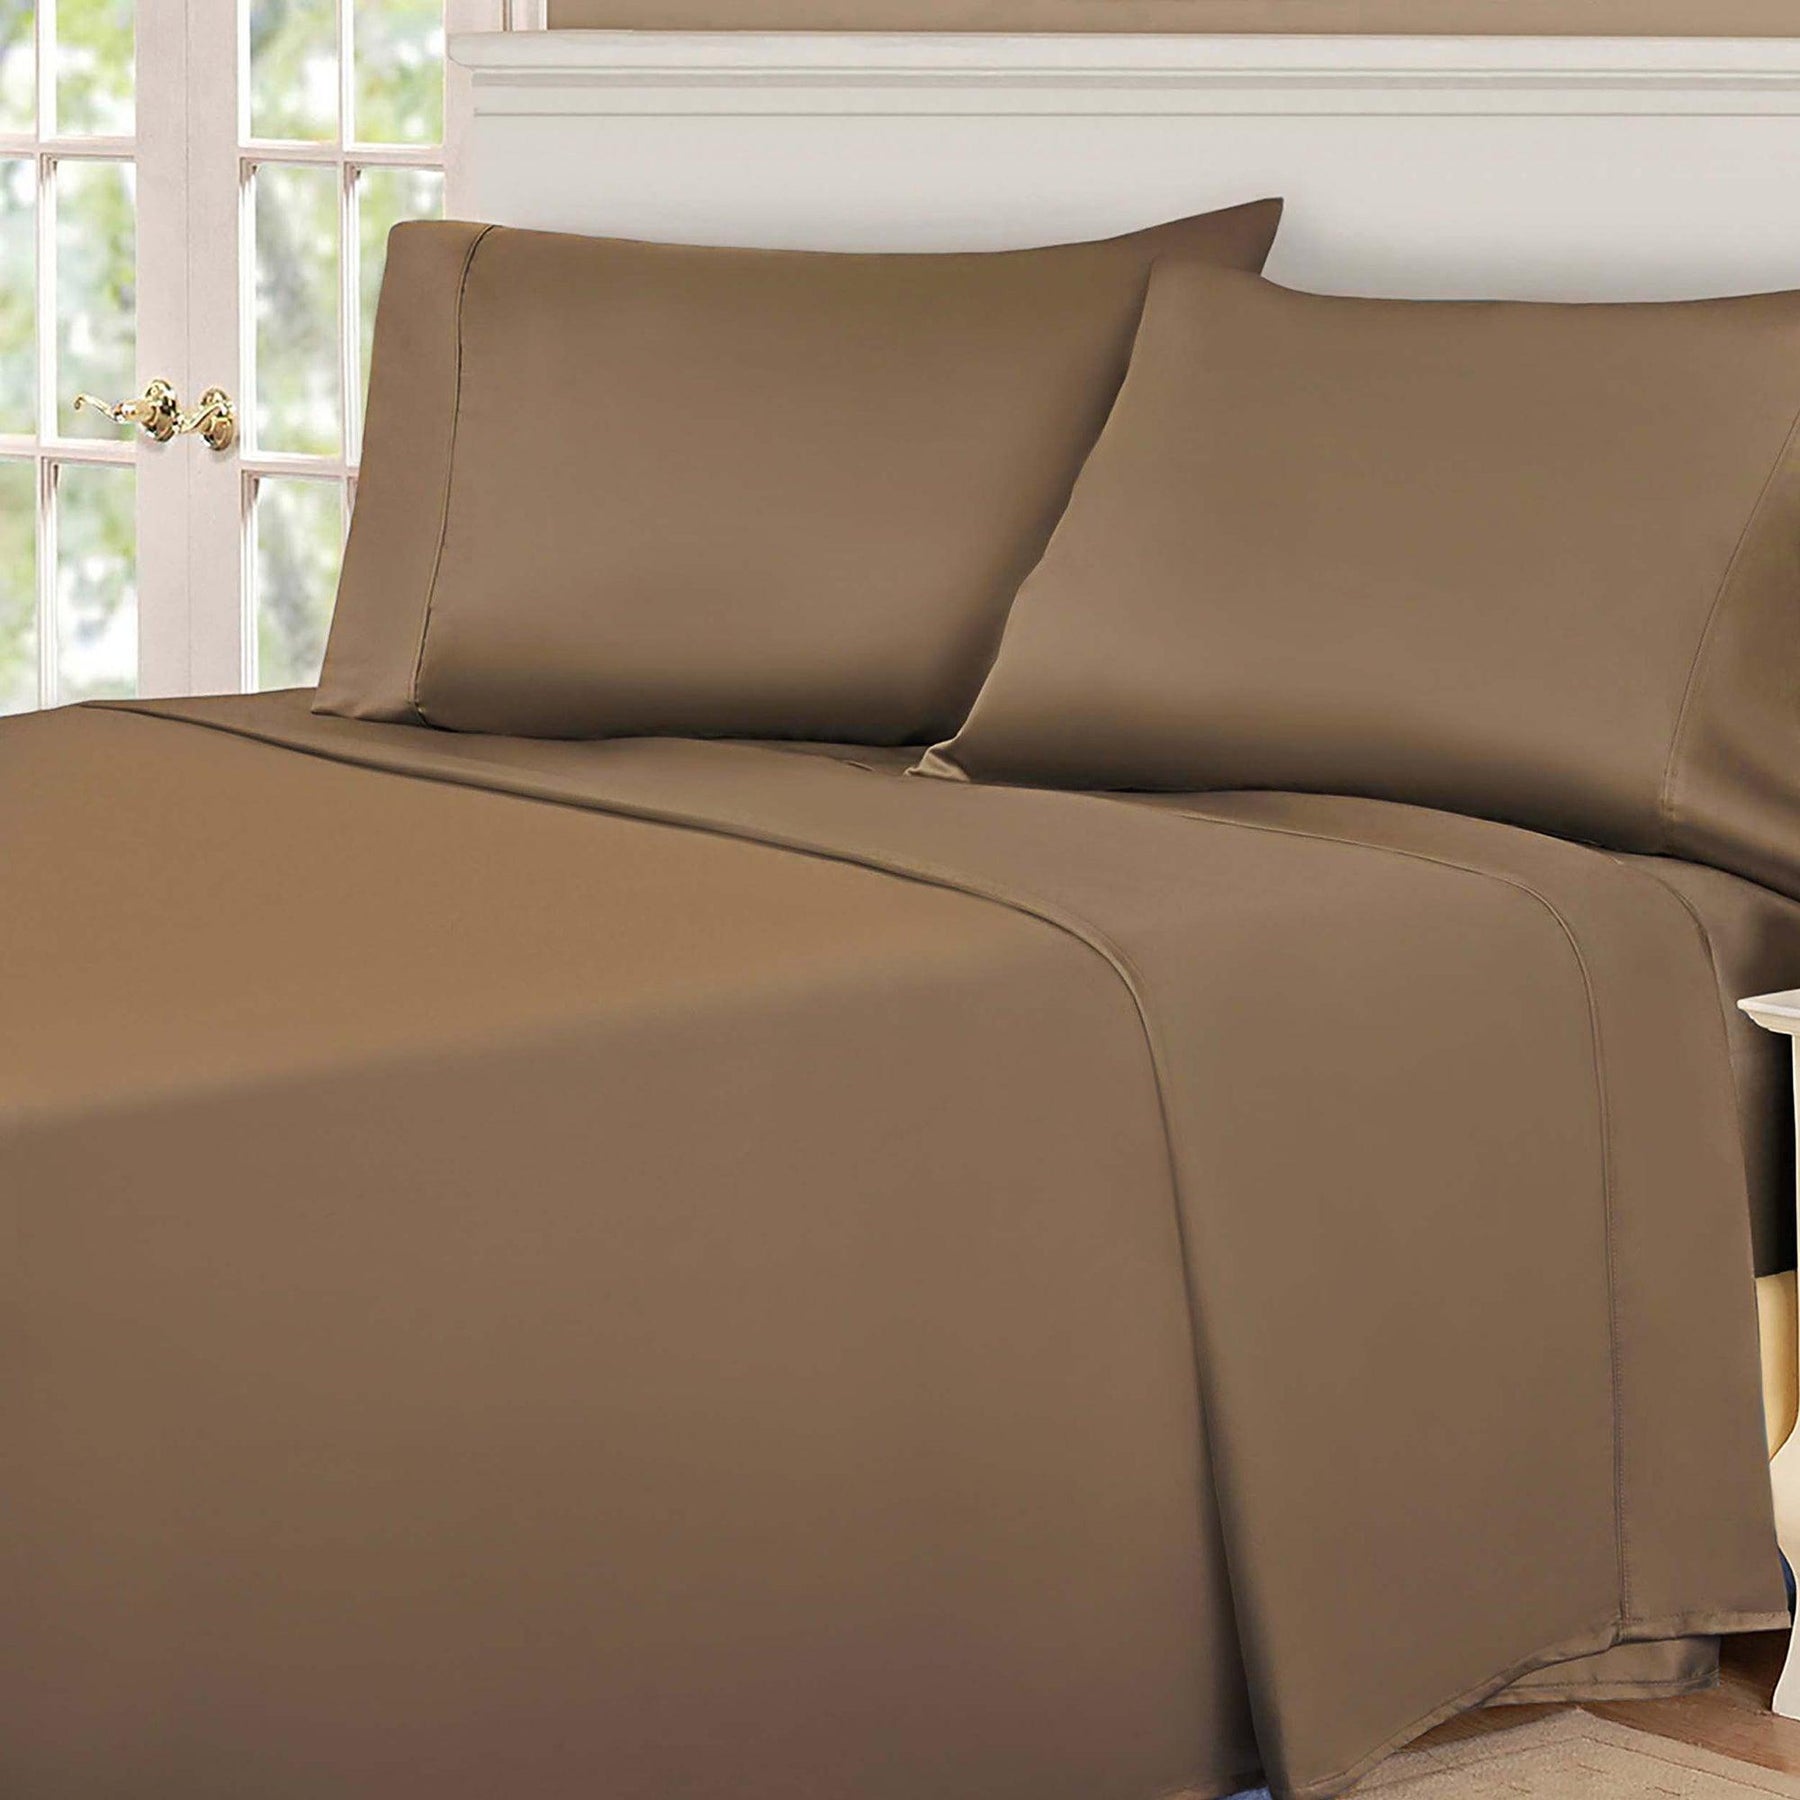  Superior Egyptian Cotton 530 Thread Count Solid Sheet Set - Taupe